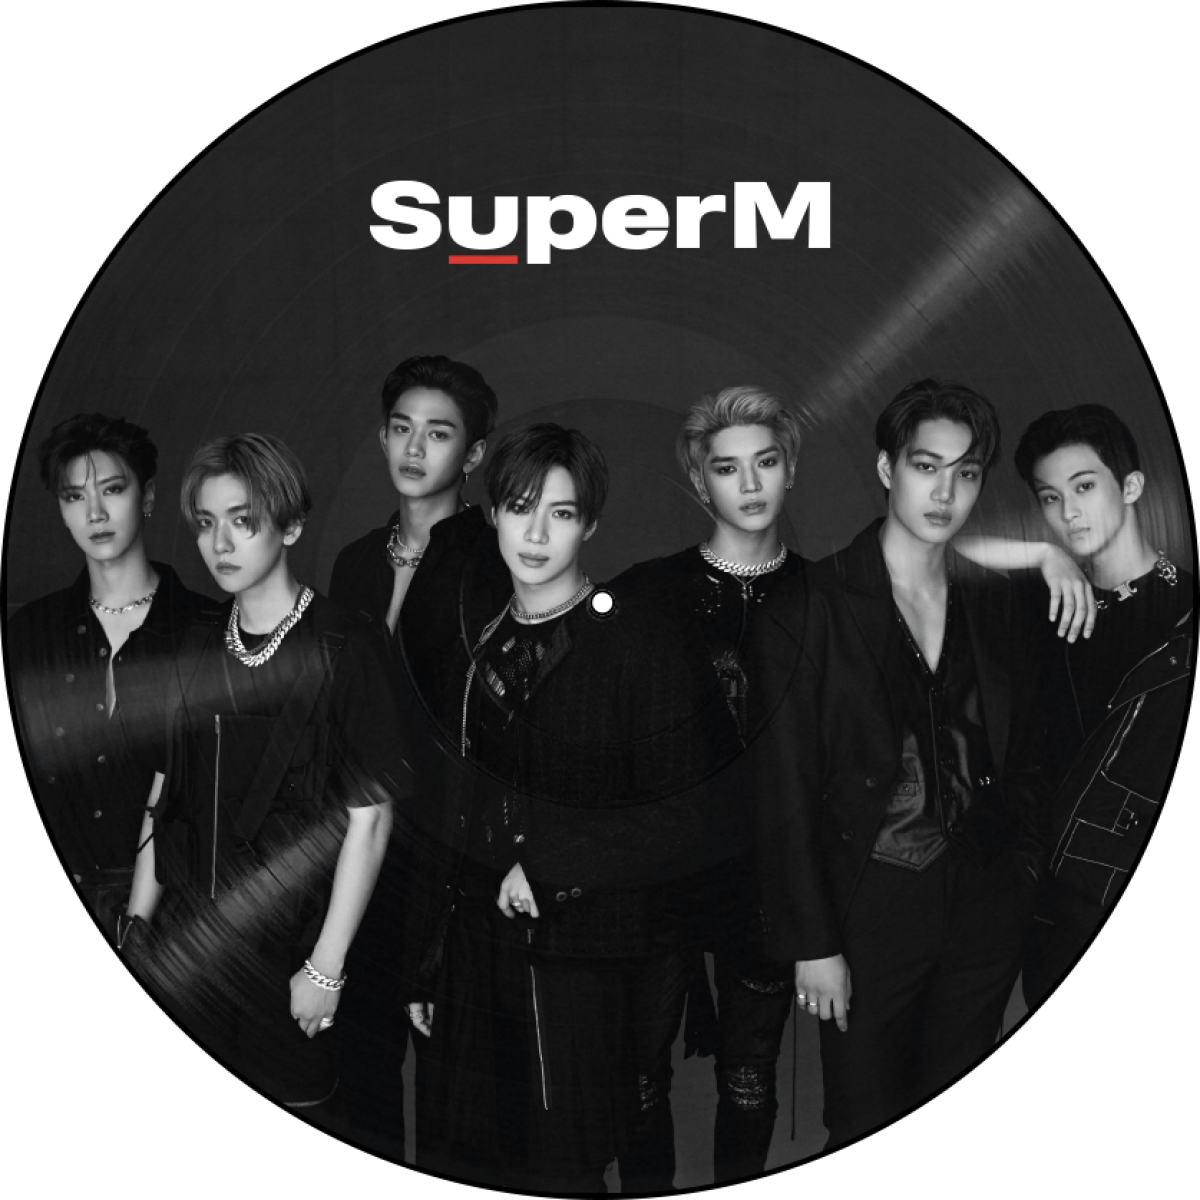 SuperM, the K-Pop super-group, is set for a 10-city debut tour that includes a concert at San Diego's Viejas Arena early next year.